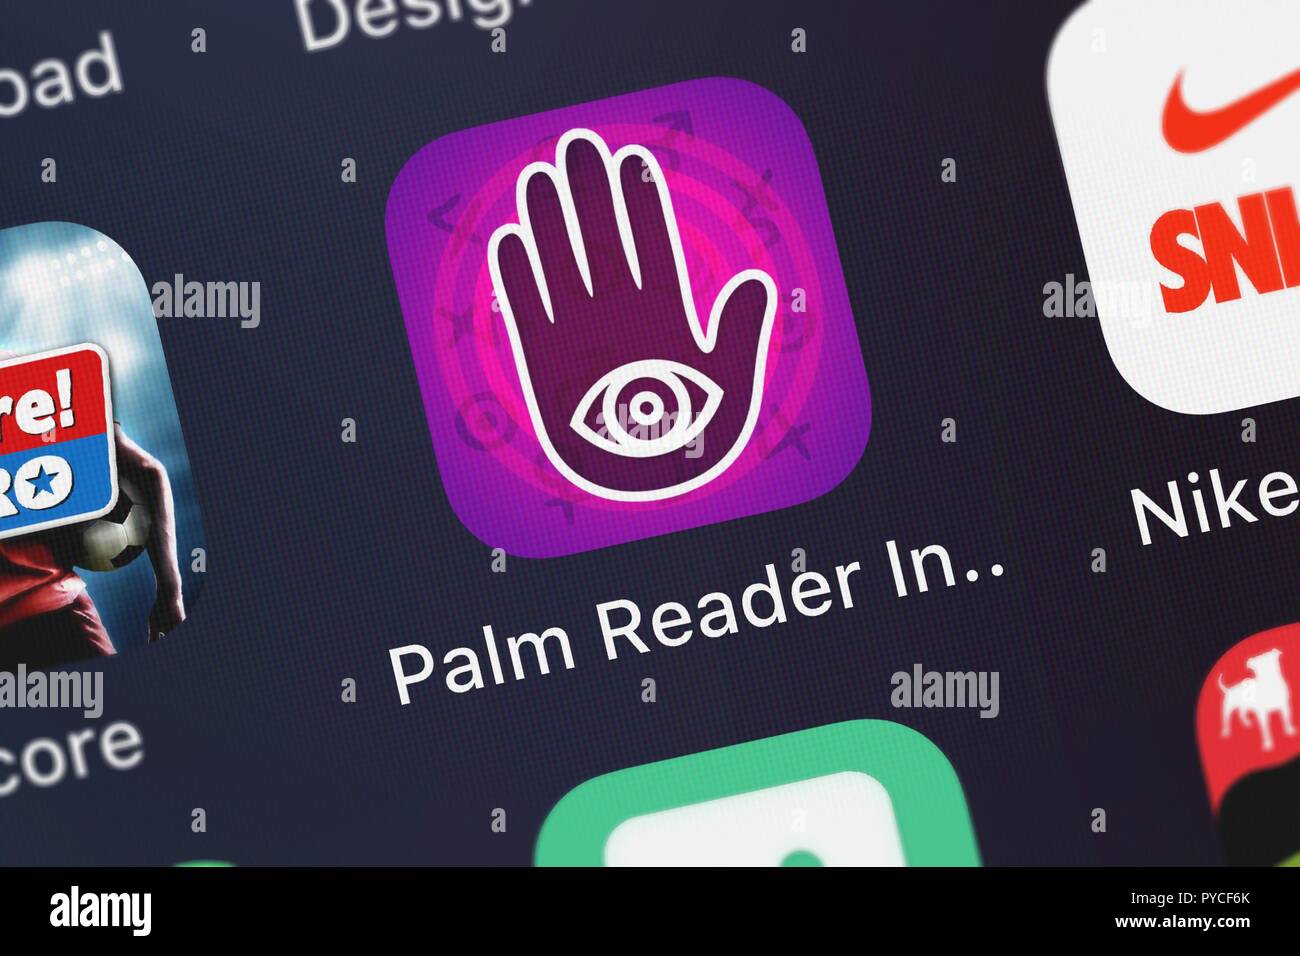 London, United Kingdom - October 26, 2018: Screenshot of the Digitalists Interactive Agency Ltd's mobile app Palm Reader Insights Palmistry. Stock Photo